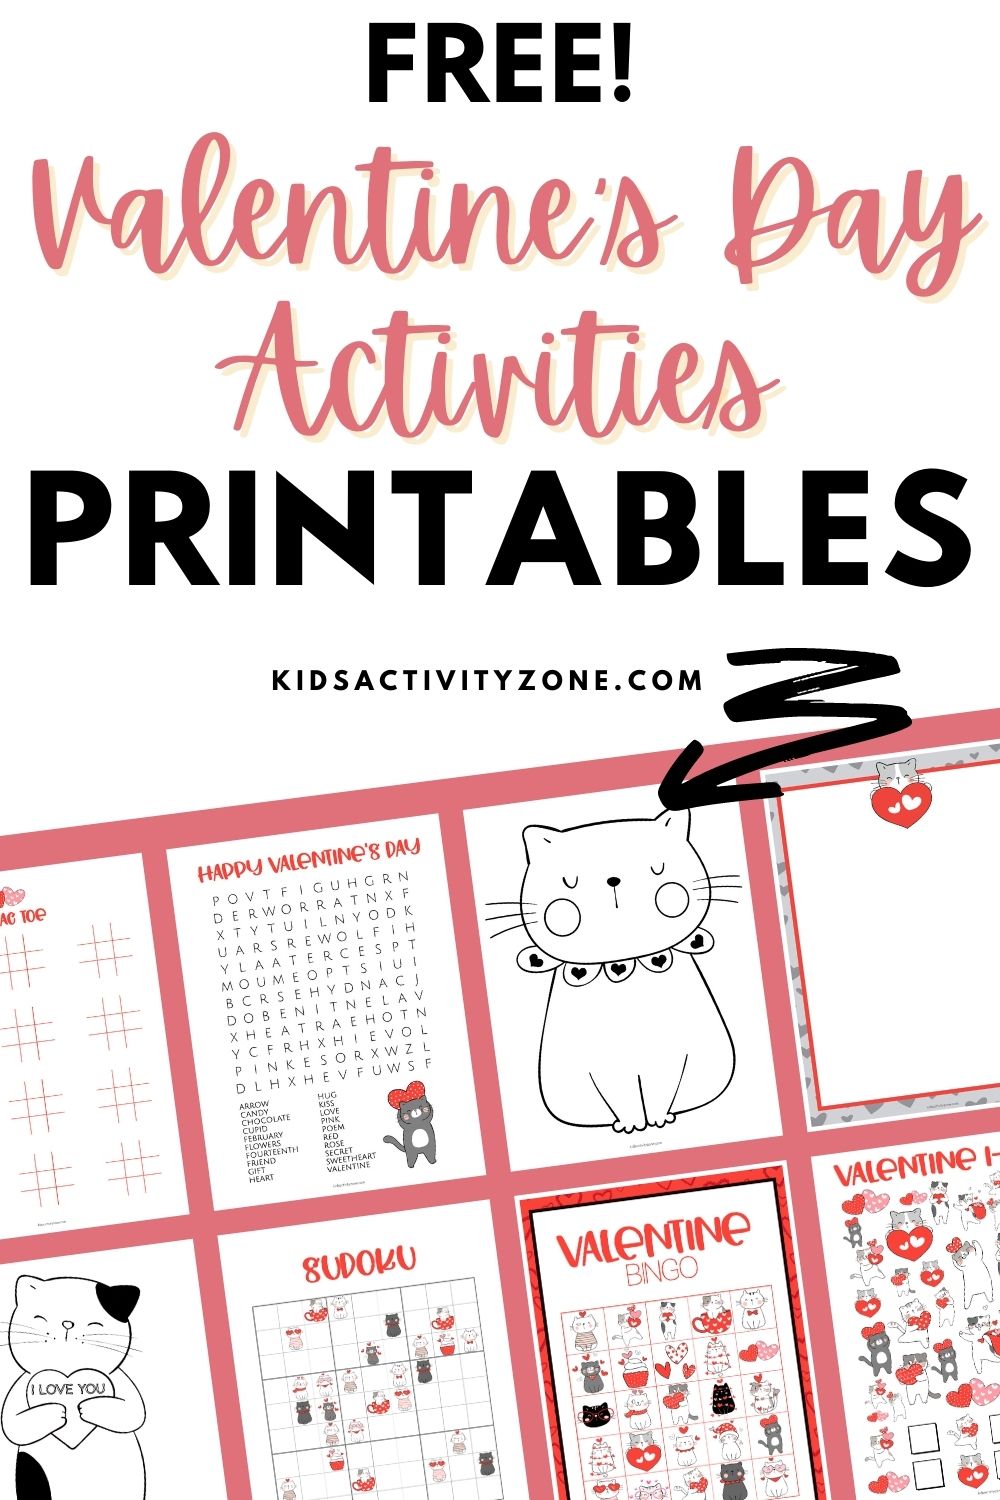 Free Valentine's Day Activities to print at home! This packet includes Valentine's Day Bingo, Sudoku, Word Find, Coloring Pages and so much more! These activities are great to use at home, in the classroom or when you throw a Valentine's Day party!!